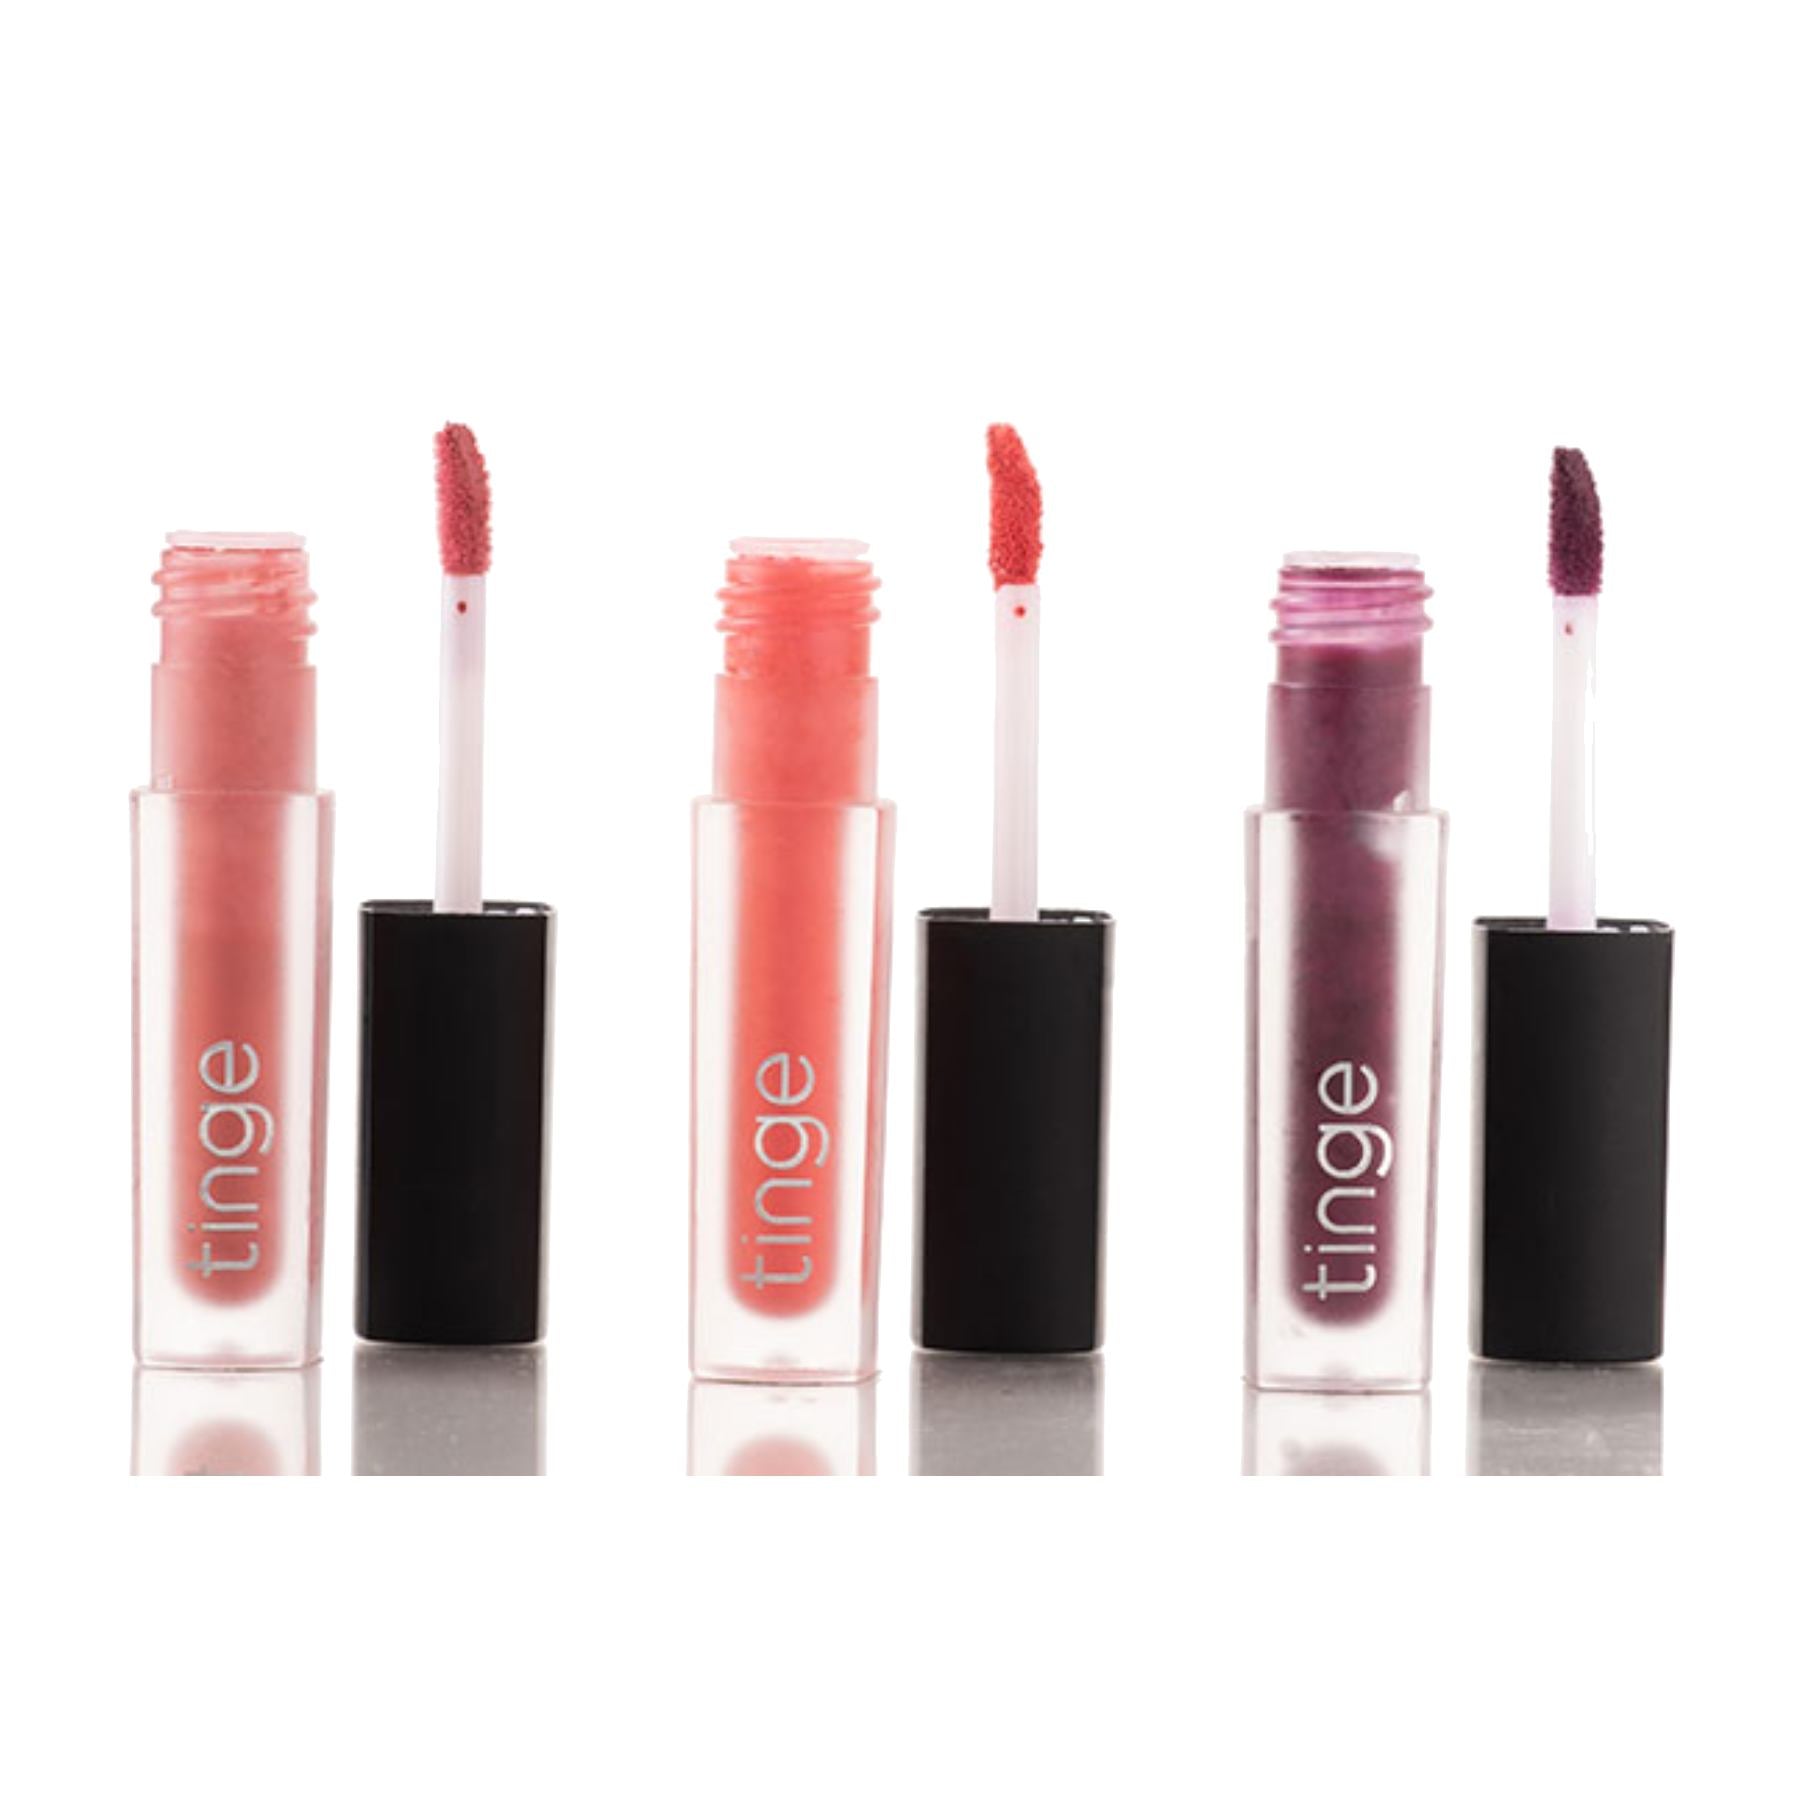 Shop Hear My Voice Liquid Lipstick-Set of 3 from Tinge on SublimeLife.in. Best for a very matte look.